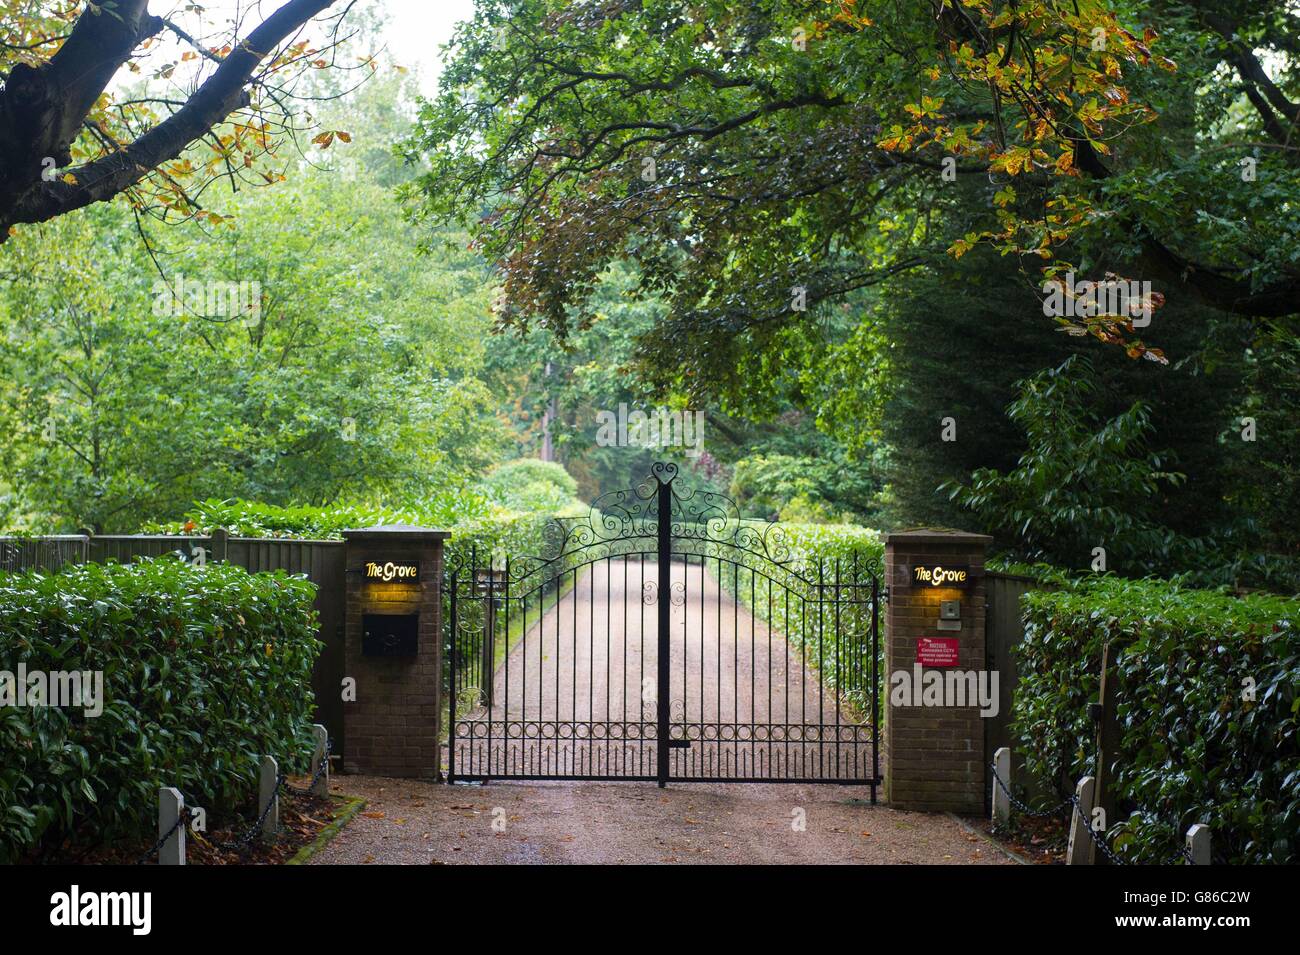 The gates of the home of Cilla Black in Denham, Buckinghamshire, as a plot to burgle the Buckinghamshire home of the late entertainer has been foiled, her eldest son Robert Willis said in a statement. Stock Photo